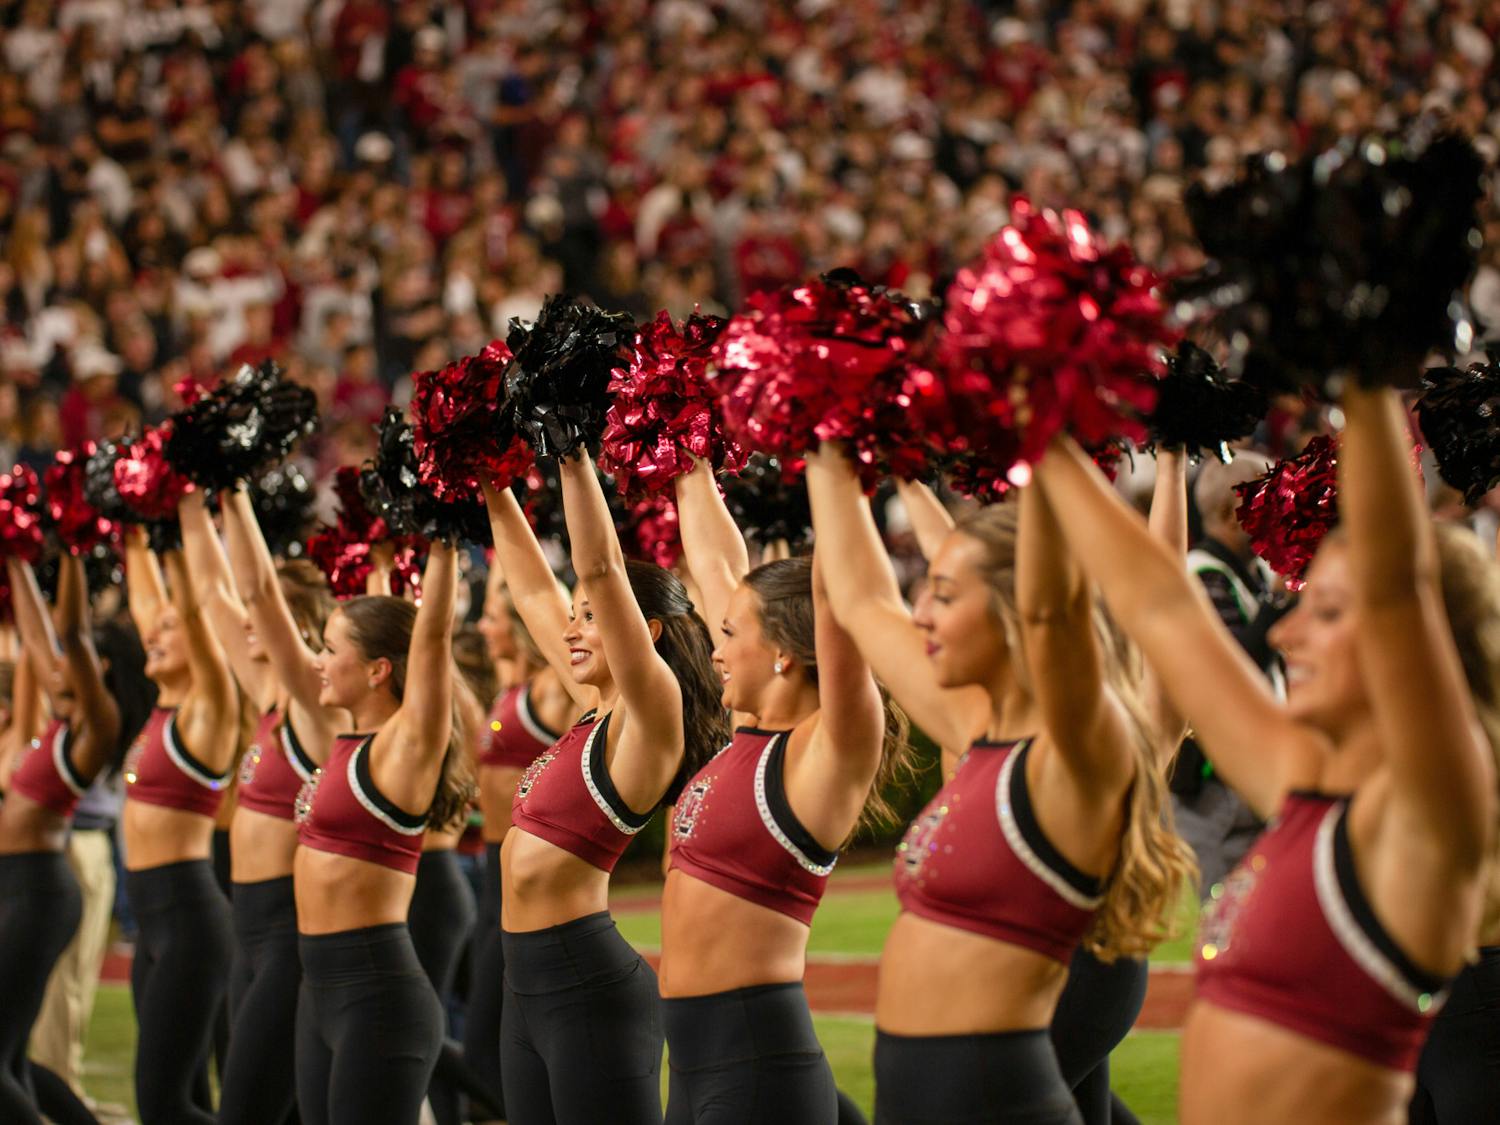 Gamecock cheerleaders cheer on their home team during a game against the S.C. State Bulldogs on Sept. 29, 2022. The Gamecocks defeated SC State 50-10.